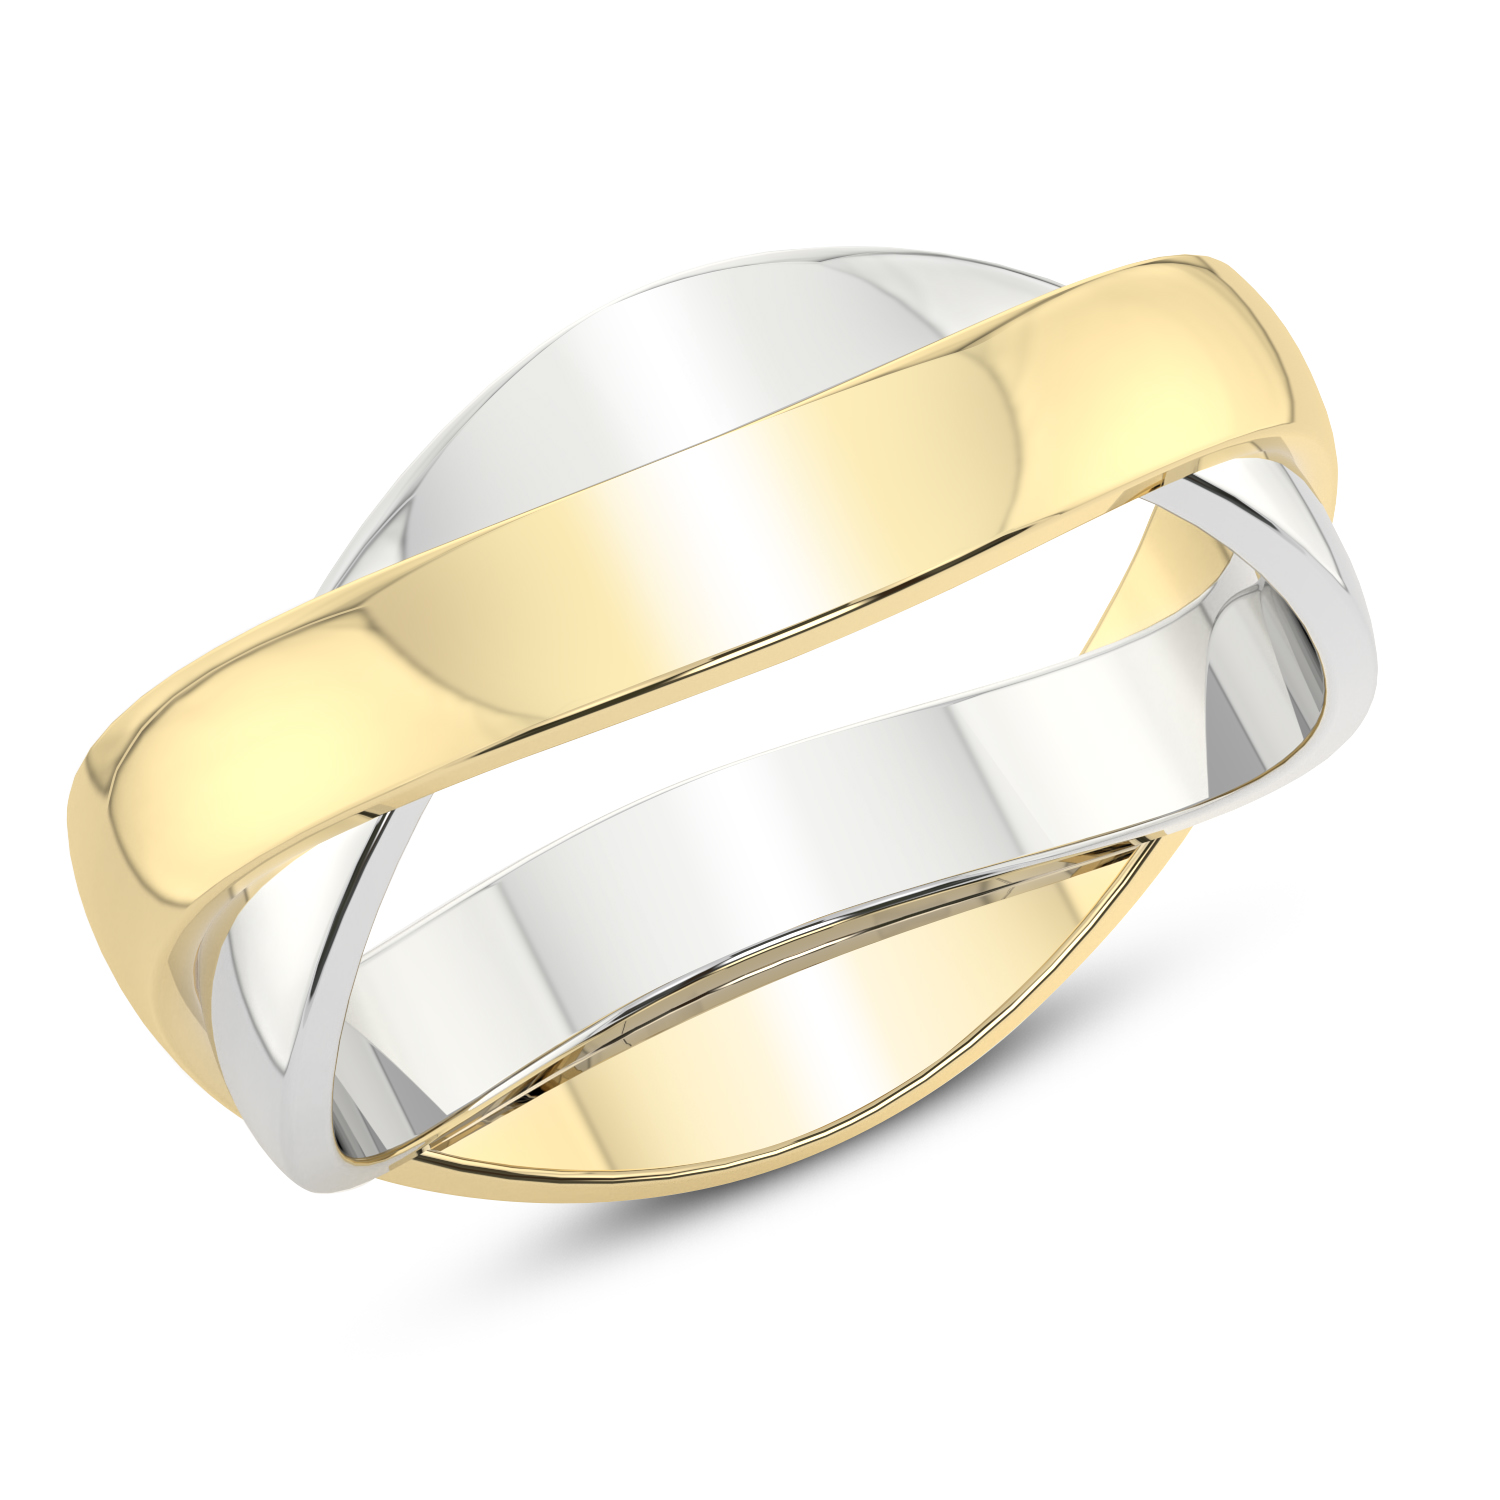 Immortal Love Couple Rings Top View